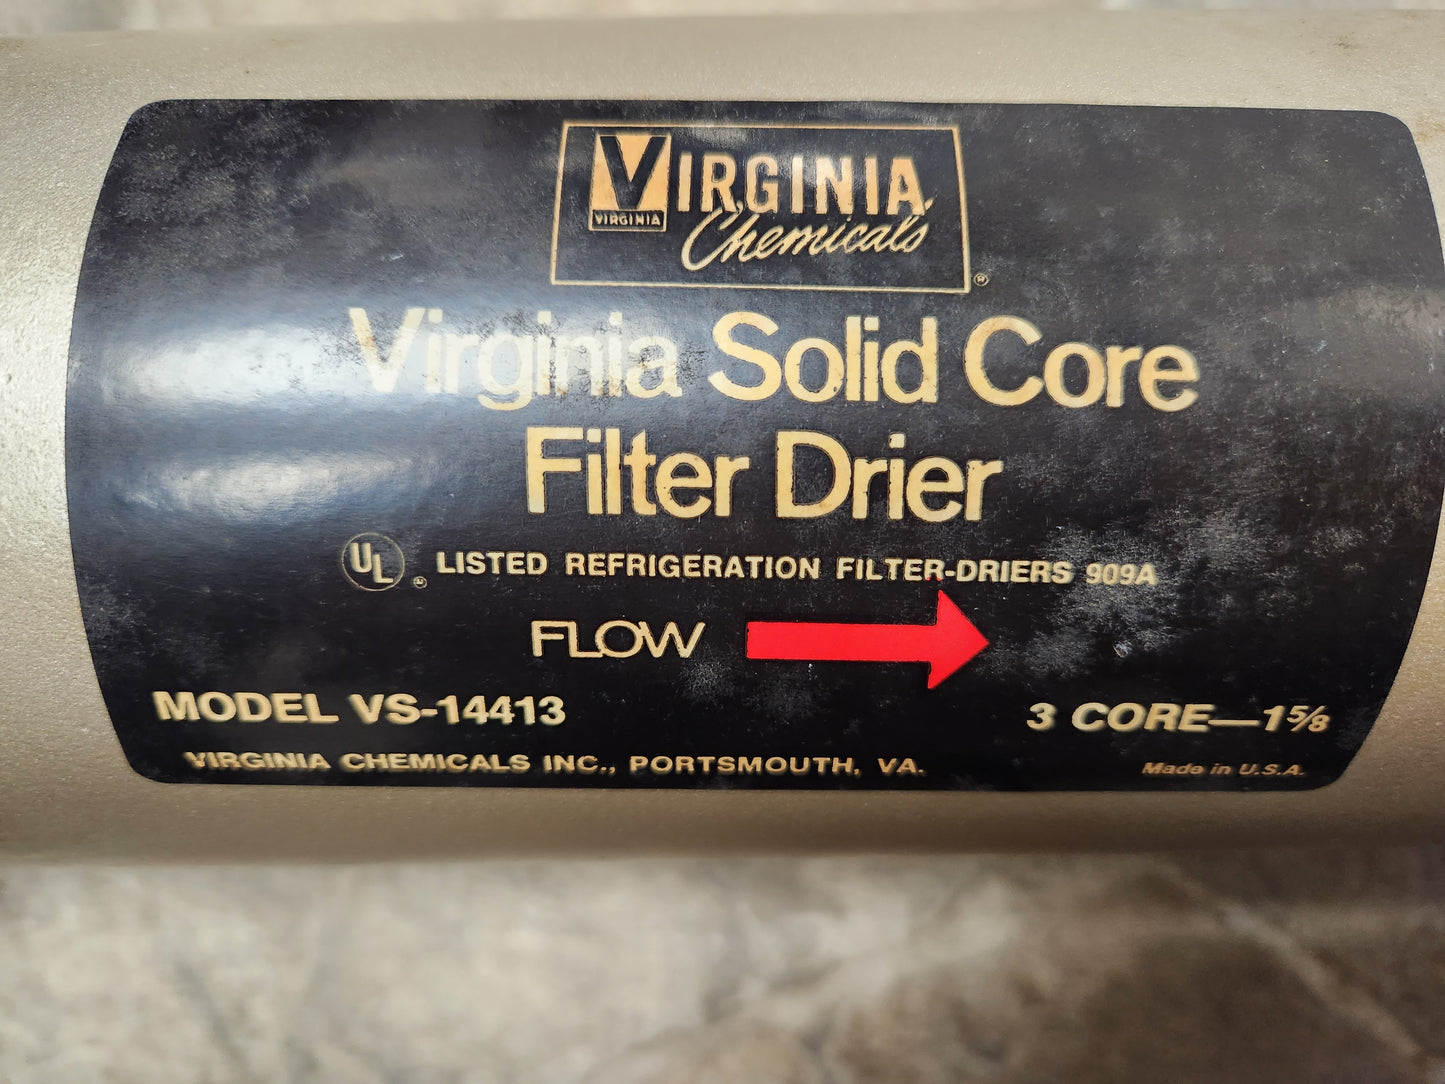 1-5/8" SOLID CORE FILTER DRIER